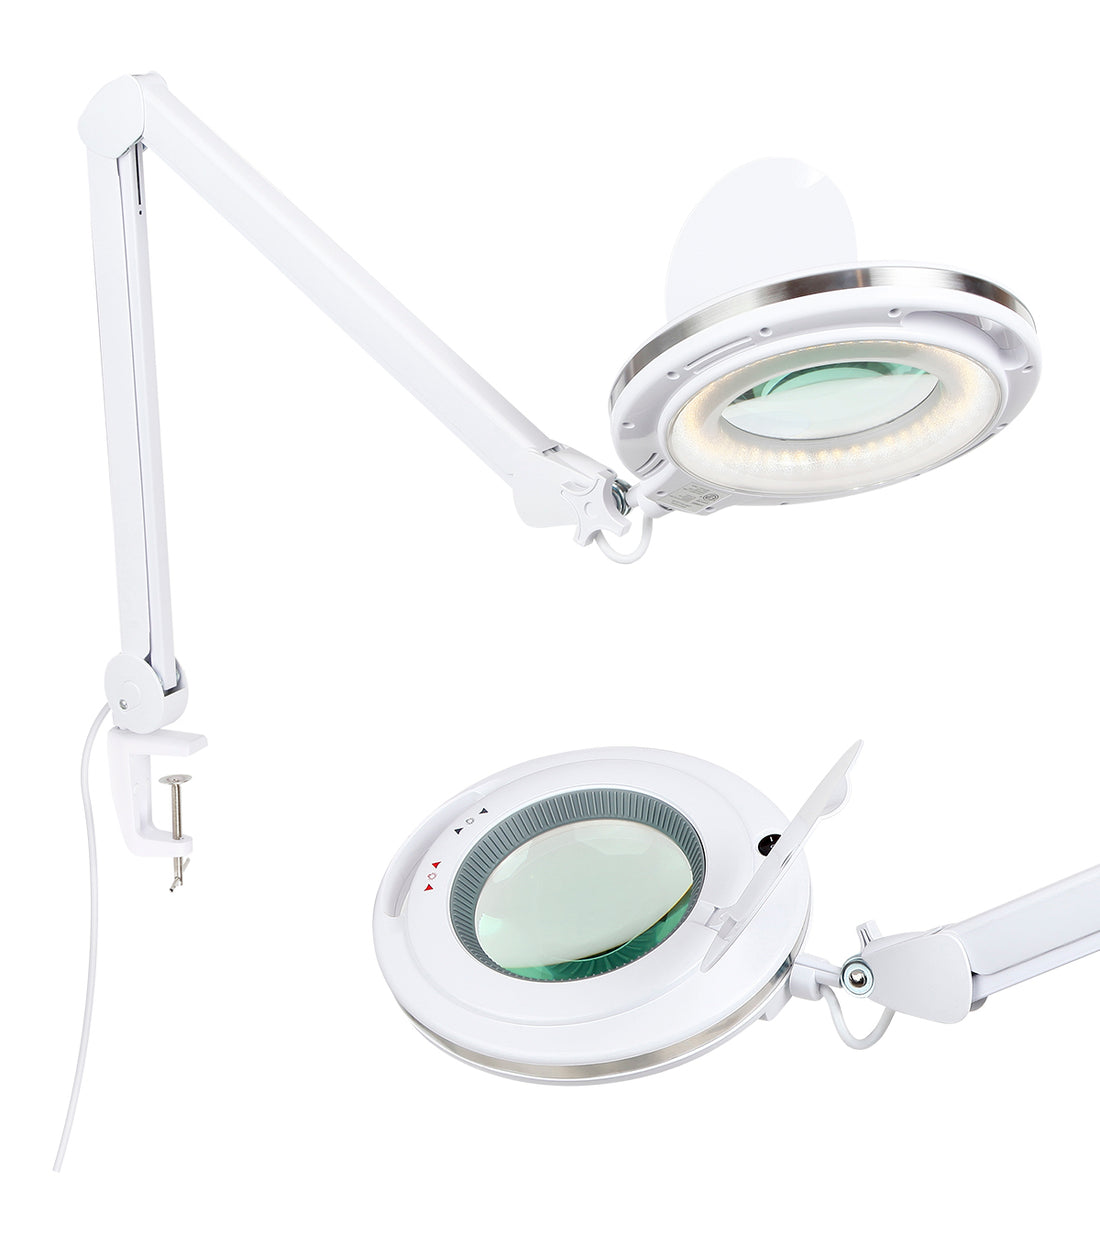 Brightech LightView Pro Magnifying Lamp & Table Clamp - Max Comfort - Pro Work Like Lash Extensions & Crafts - Durable Glass Magnifier with Bright LED Light - Dimmable & Adjustable Light Color